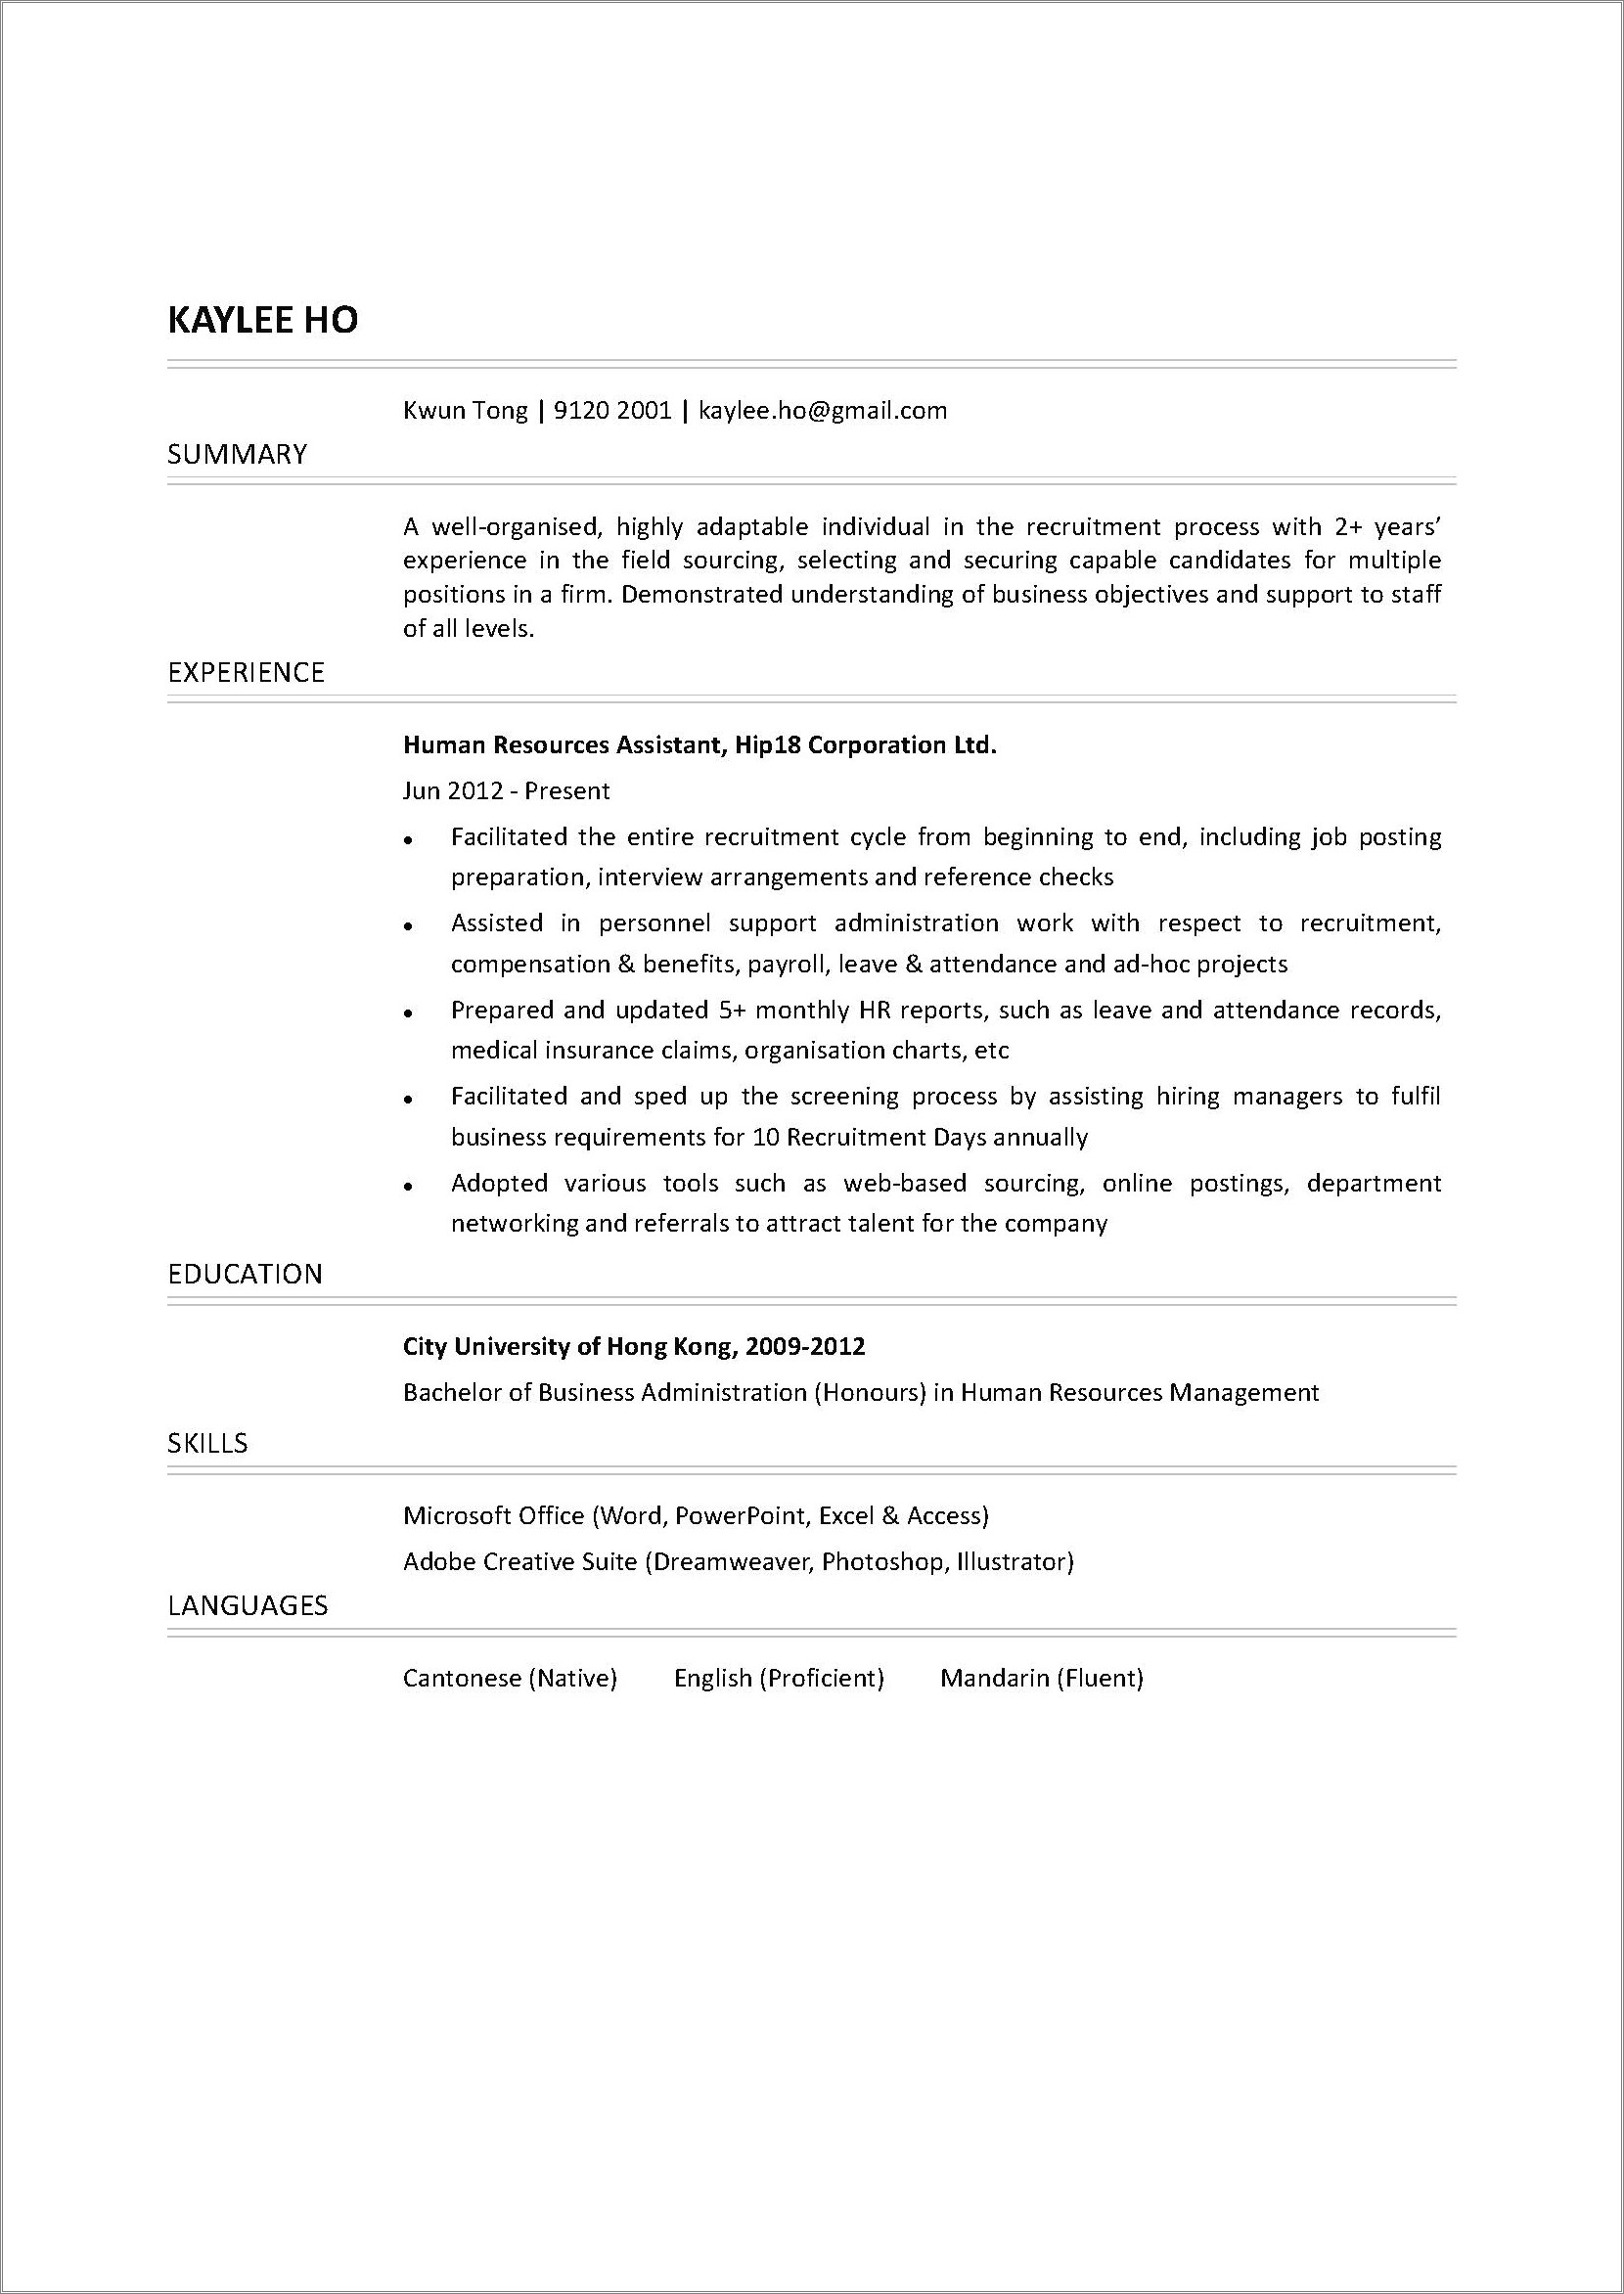 Resume Cover Letter For Human Resource Assistant